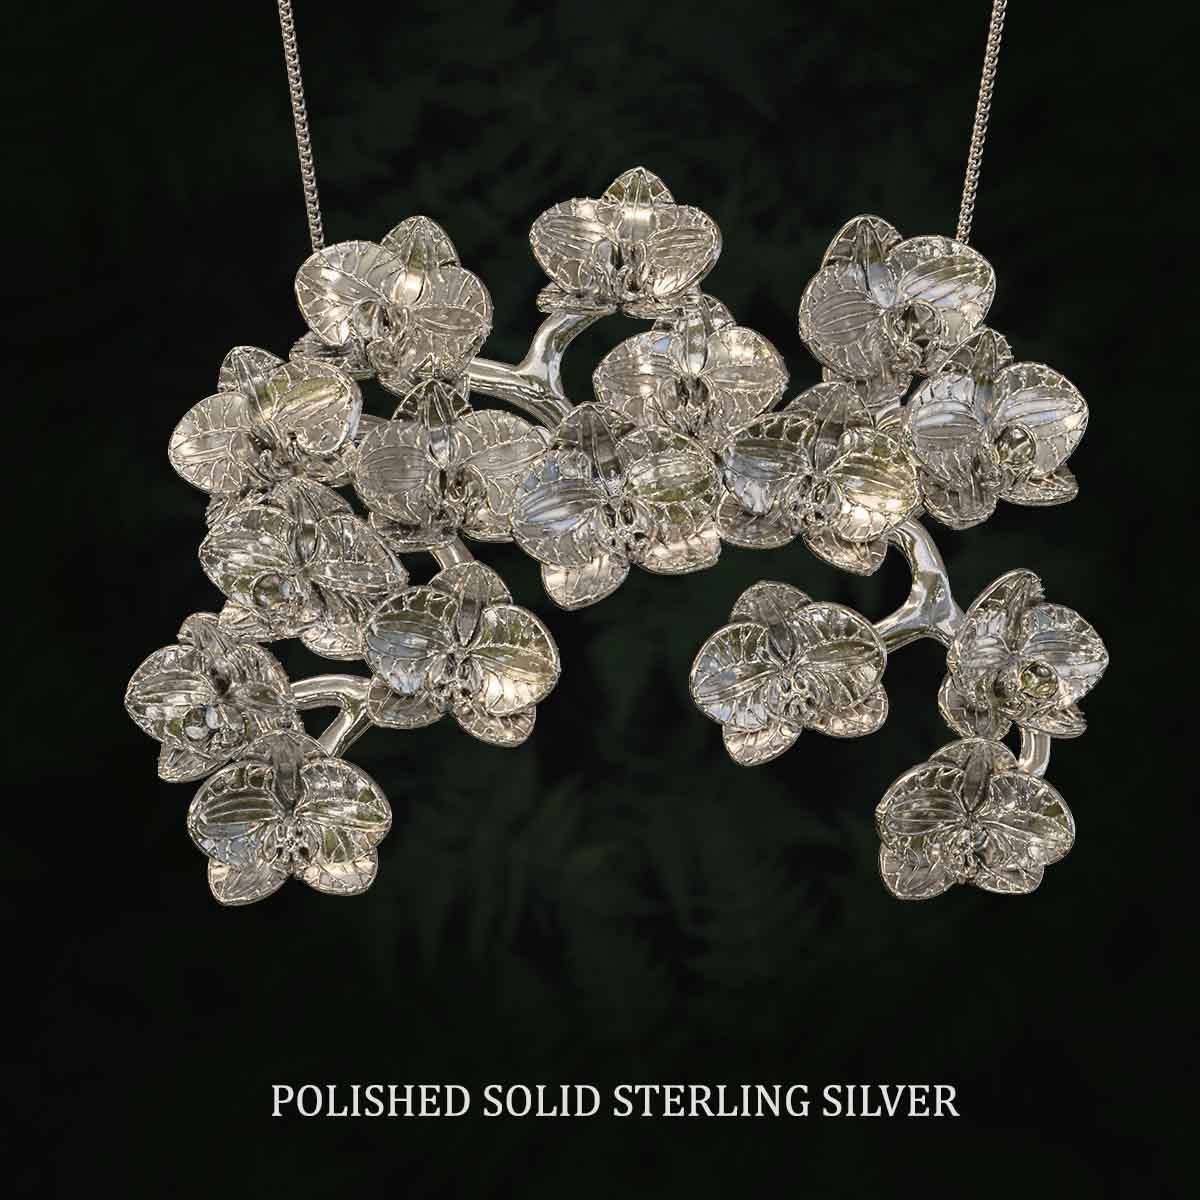     Polished-Solid-Sterling-Silver-Grand-Orchid-Bough-Pendant-Jewelry-For-Necklace